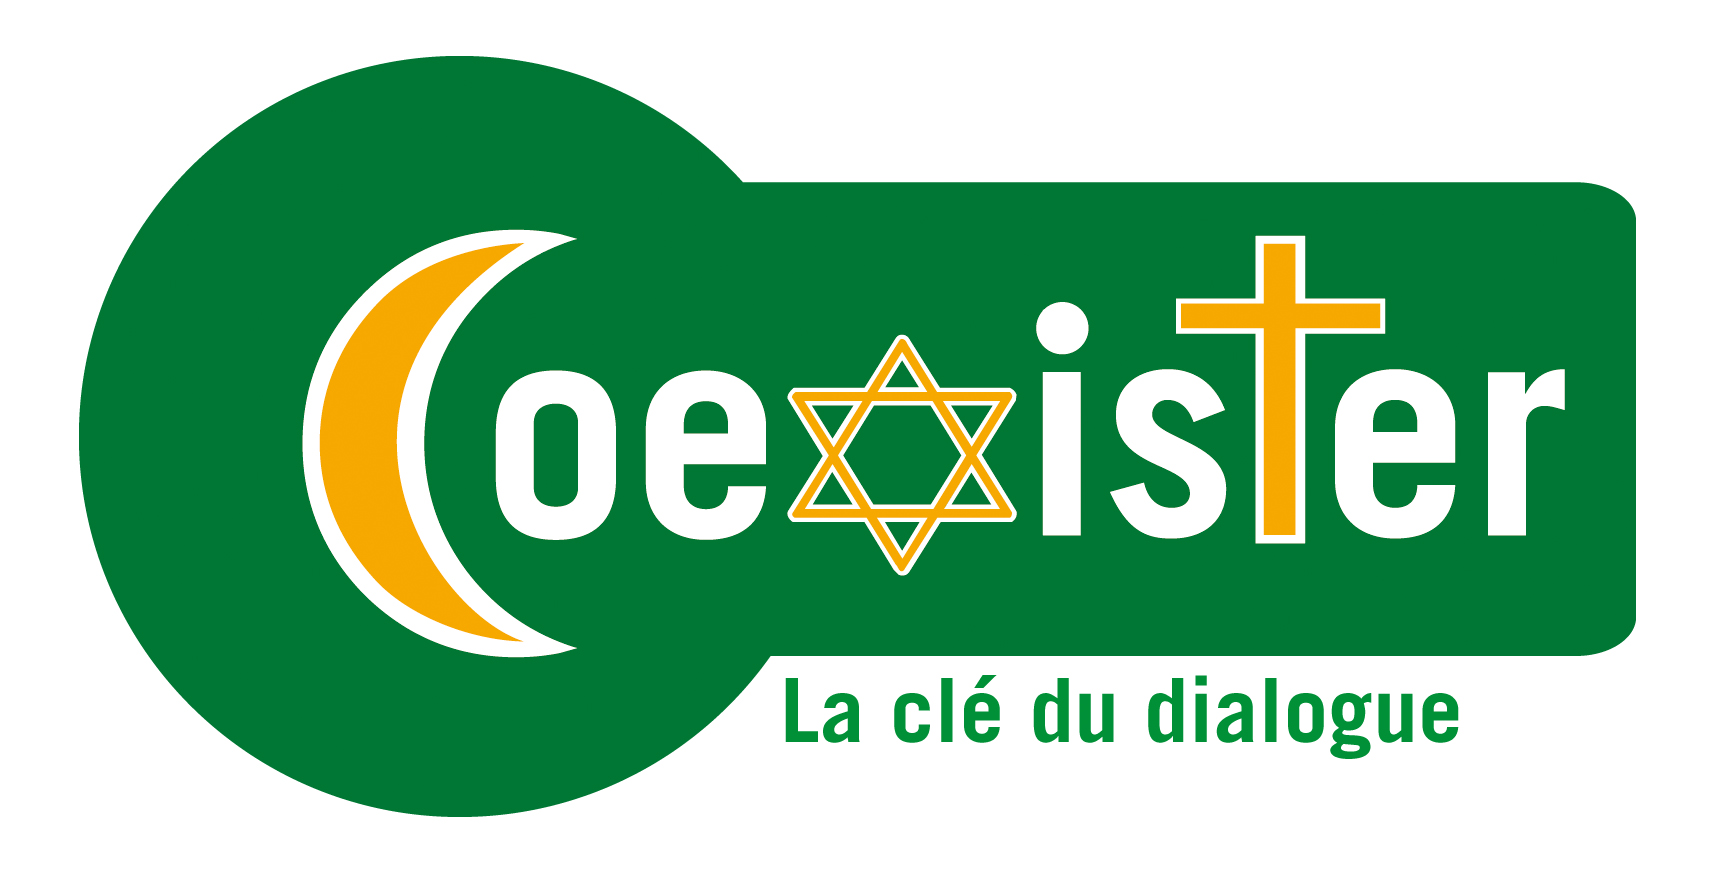 Logo of the "Coexister" association (source: www.coexister.fr)